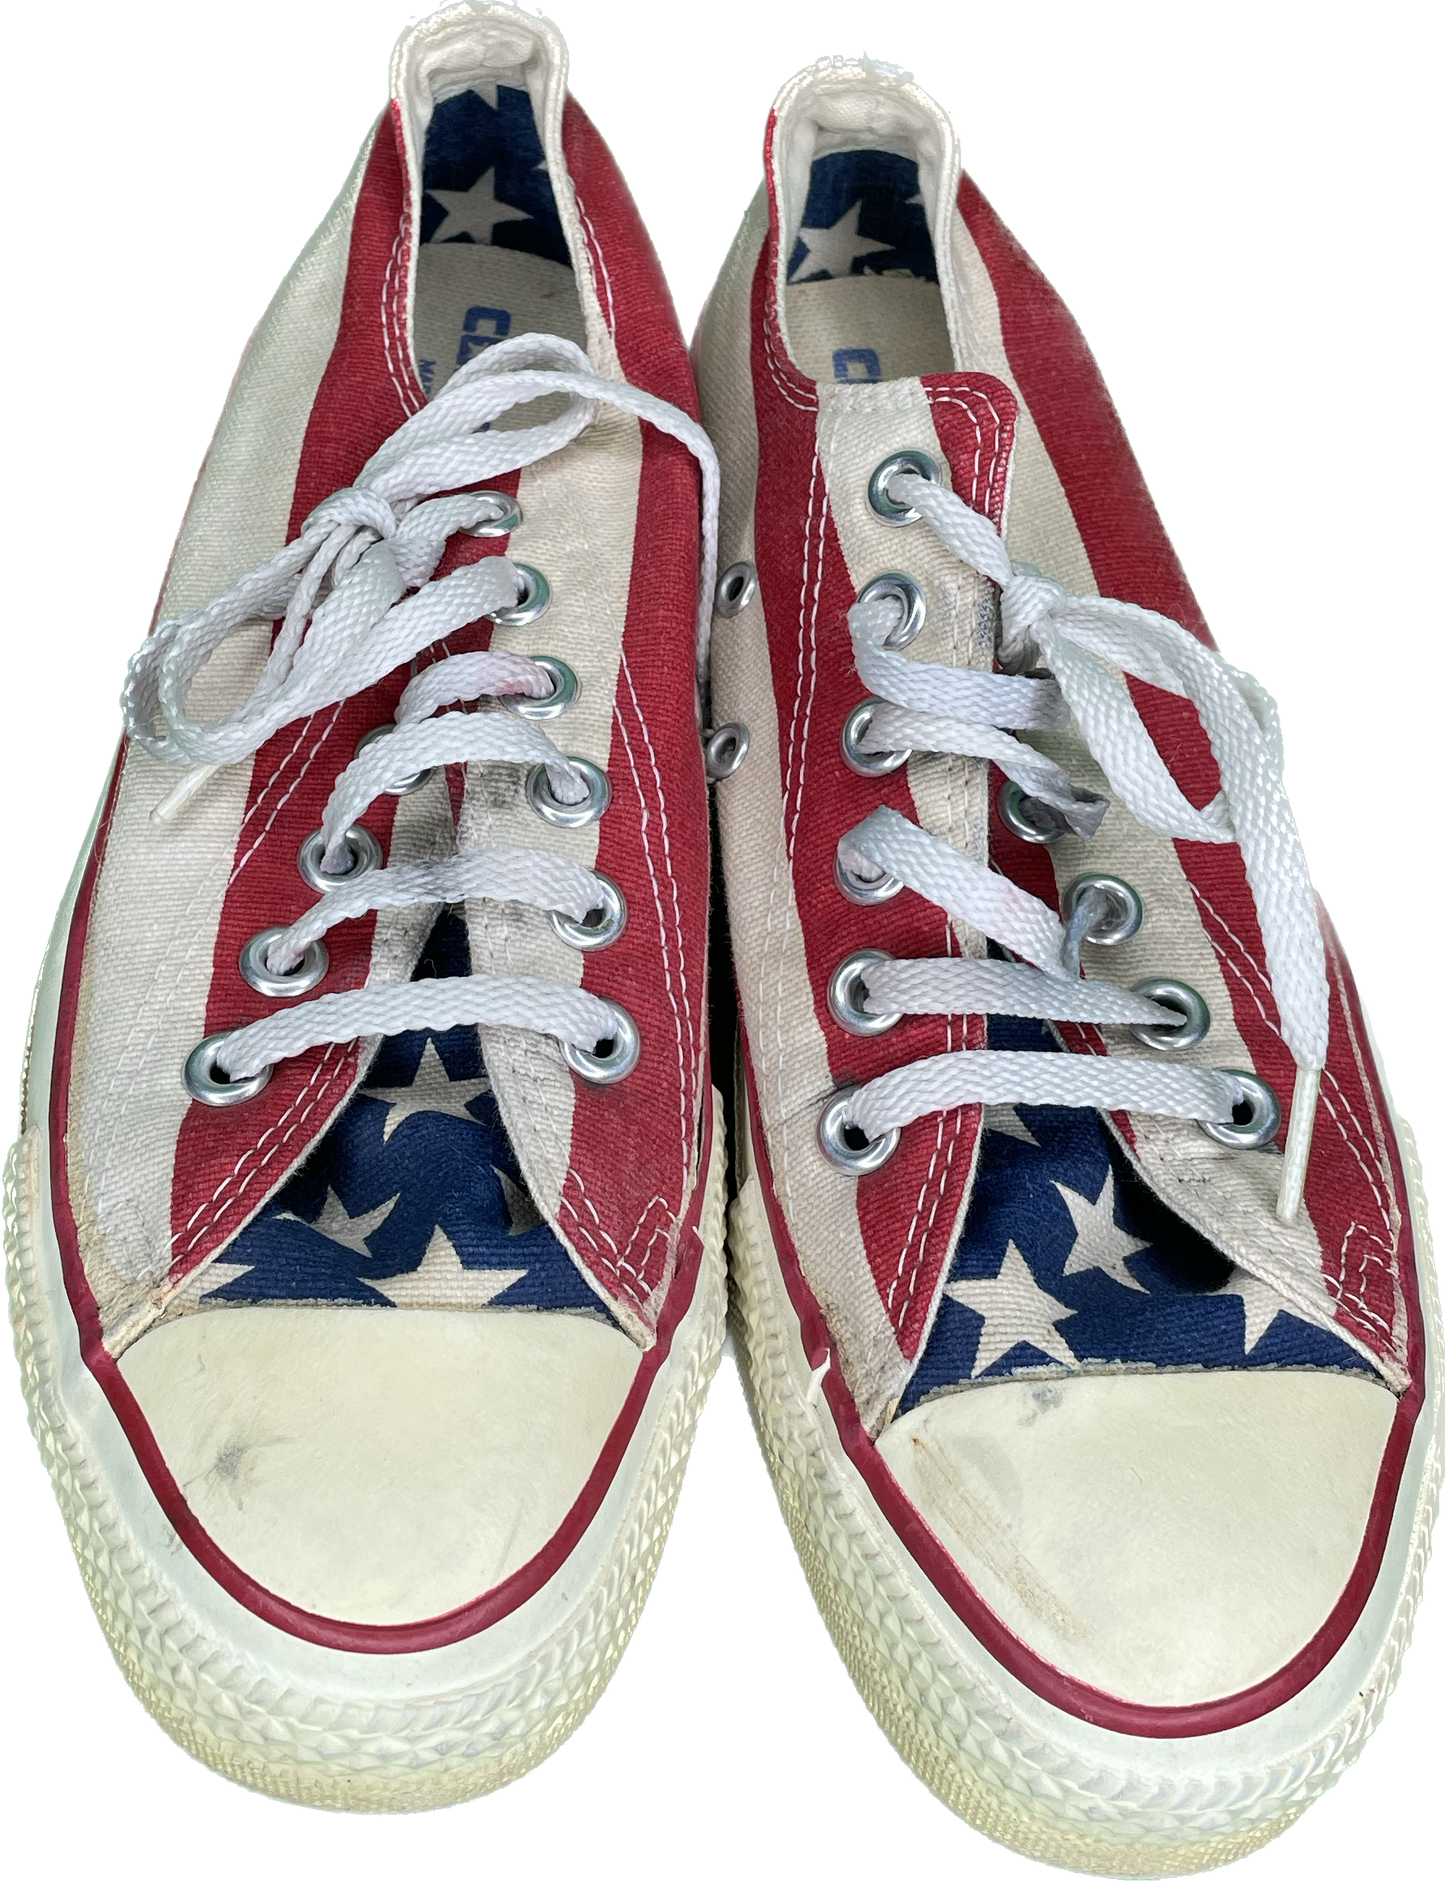 Vintage Sz 5 1/2 Converse American Flag USA Made Skate Surf Shoes 70s 80s